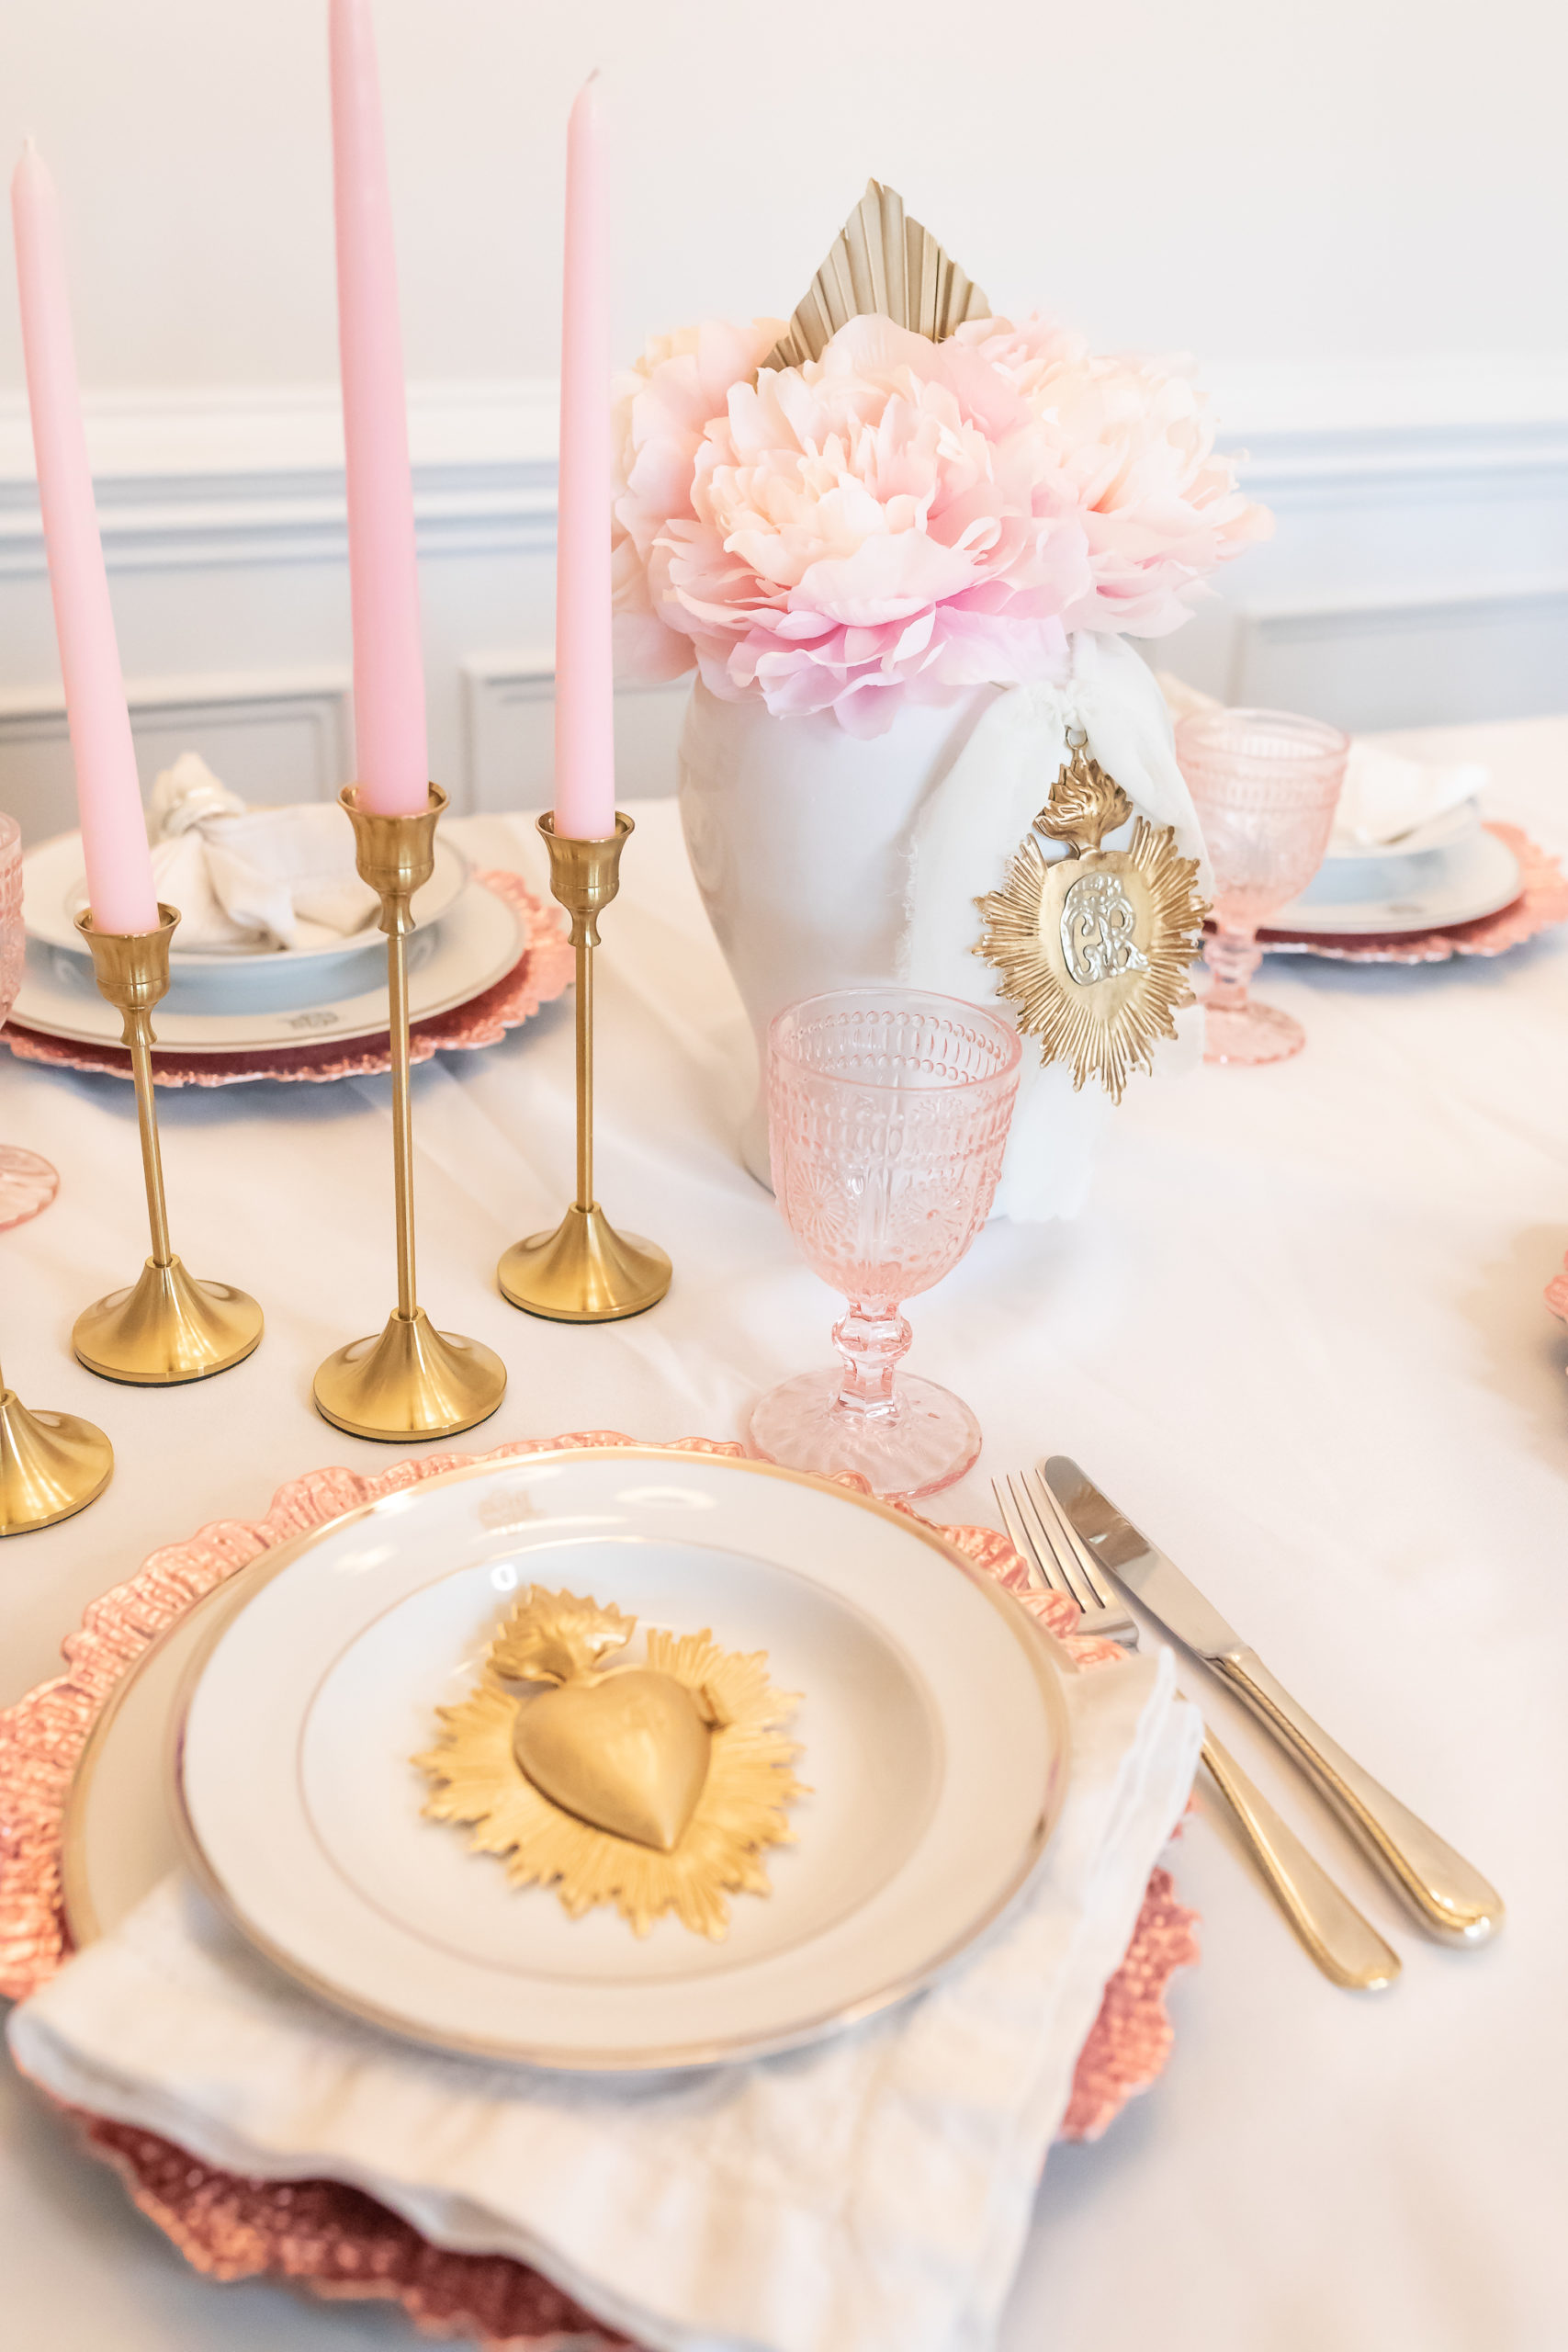 How to Create Budget-Friendly Valentine's Day Tablescape